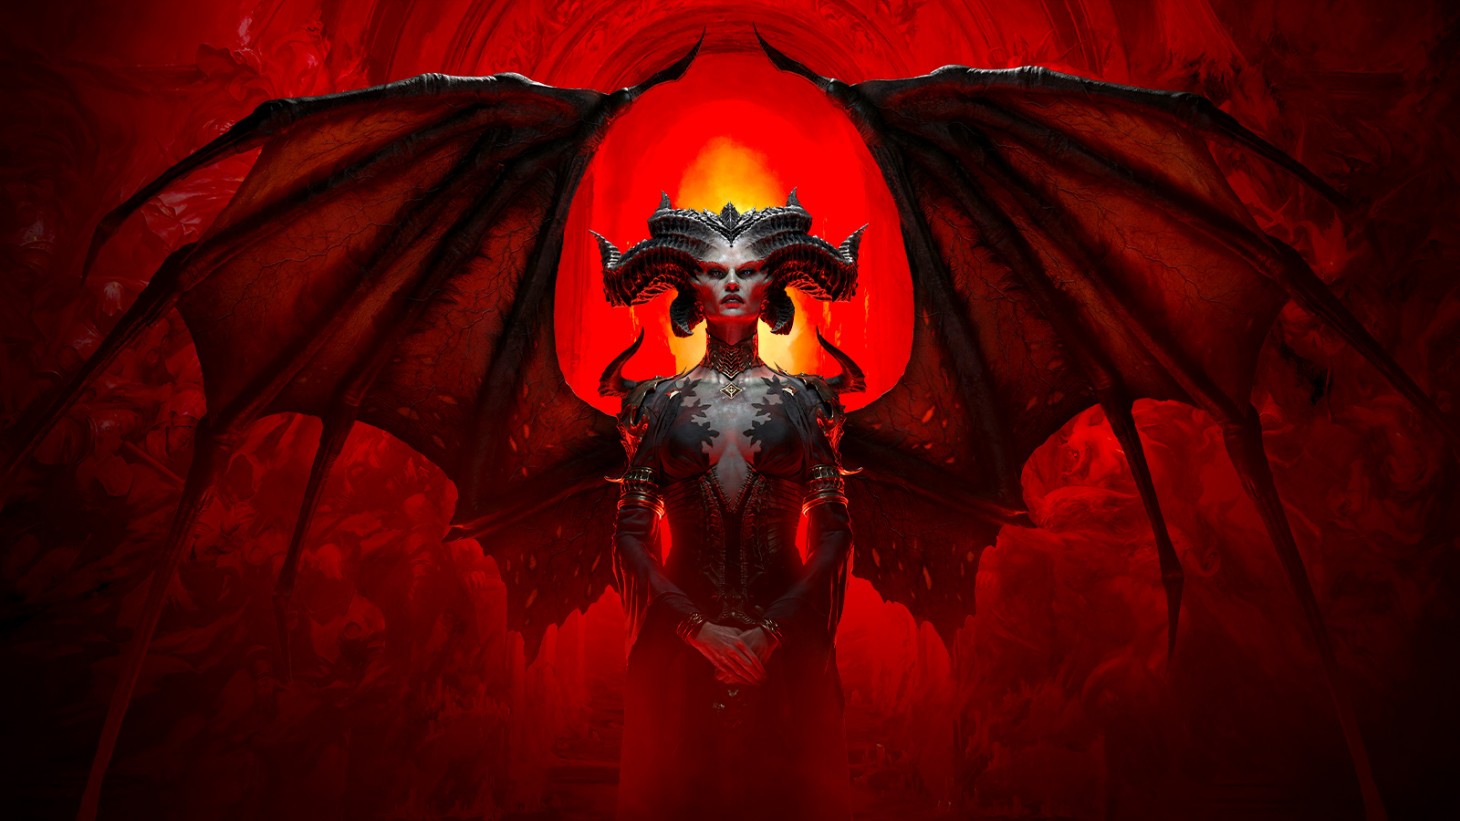 Diablo IV Ignites the Gaming World with Record-Breaking $666M Sales in First Five Days